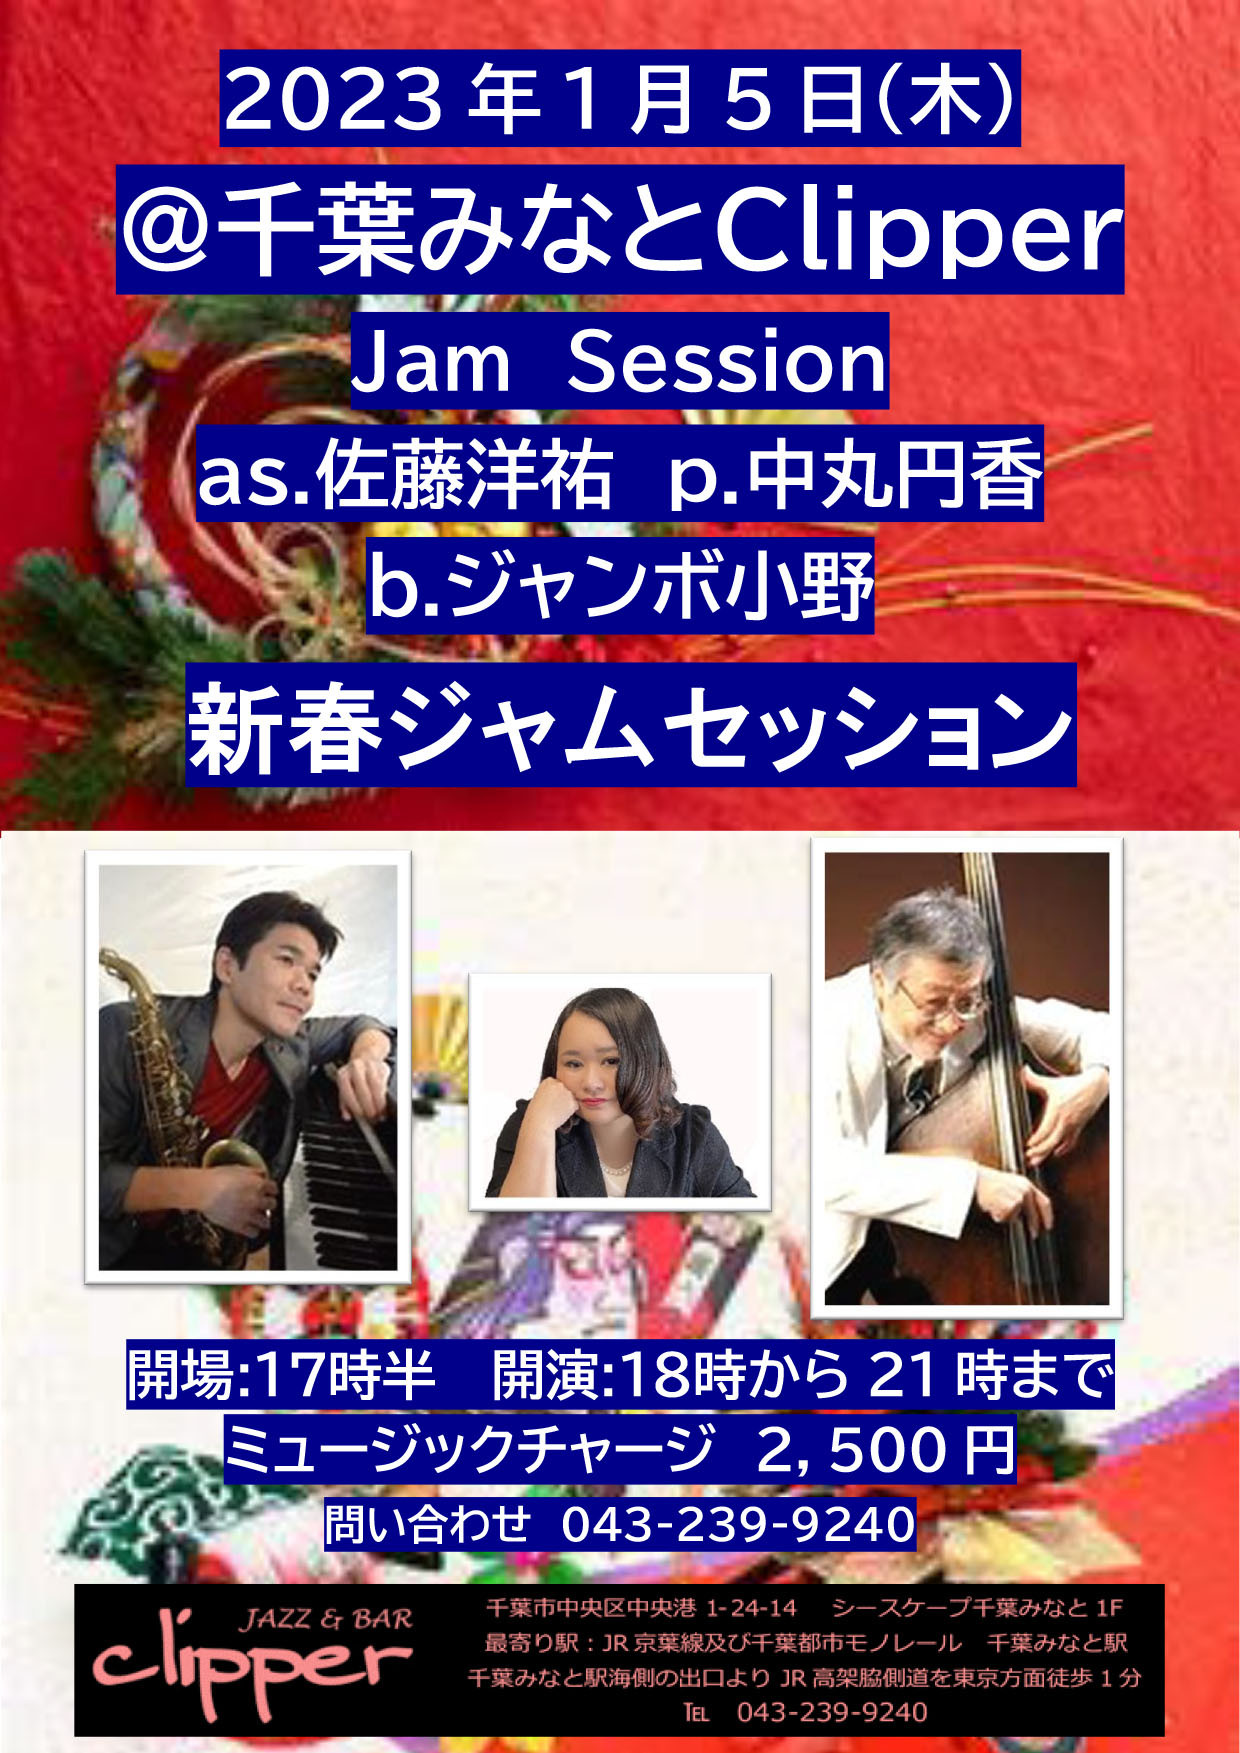 New Year Jam Session @ clipper